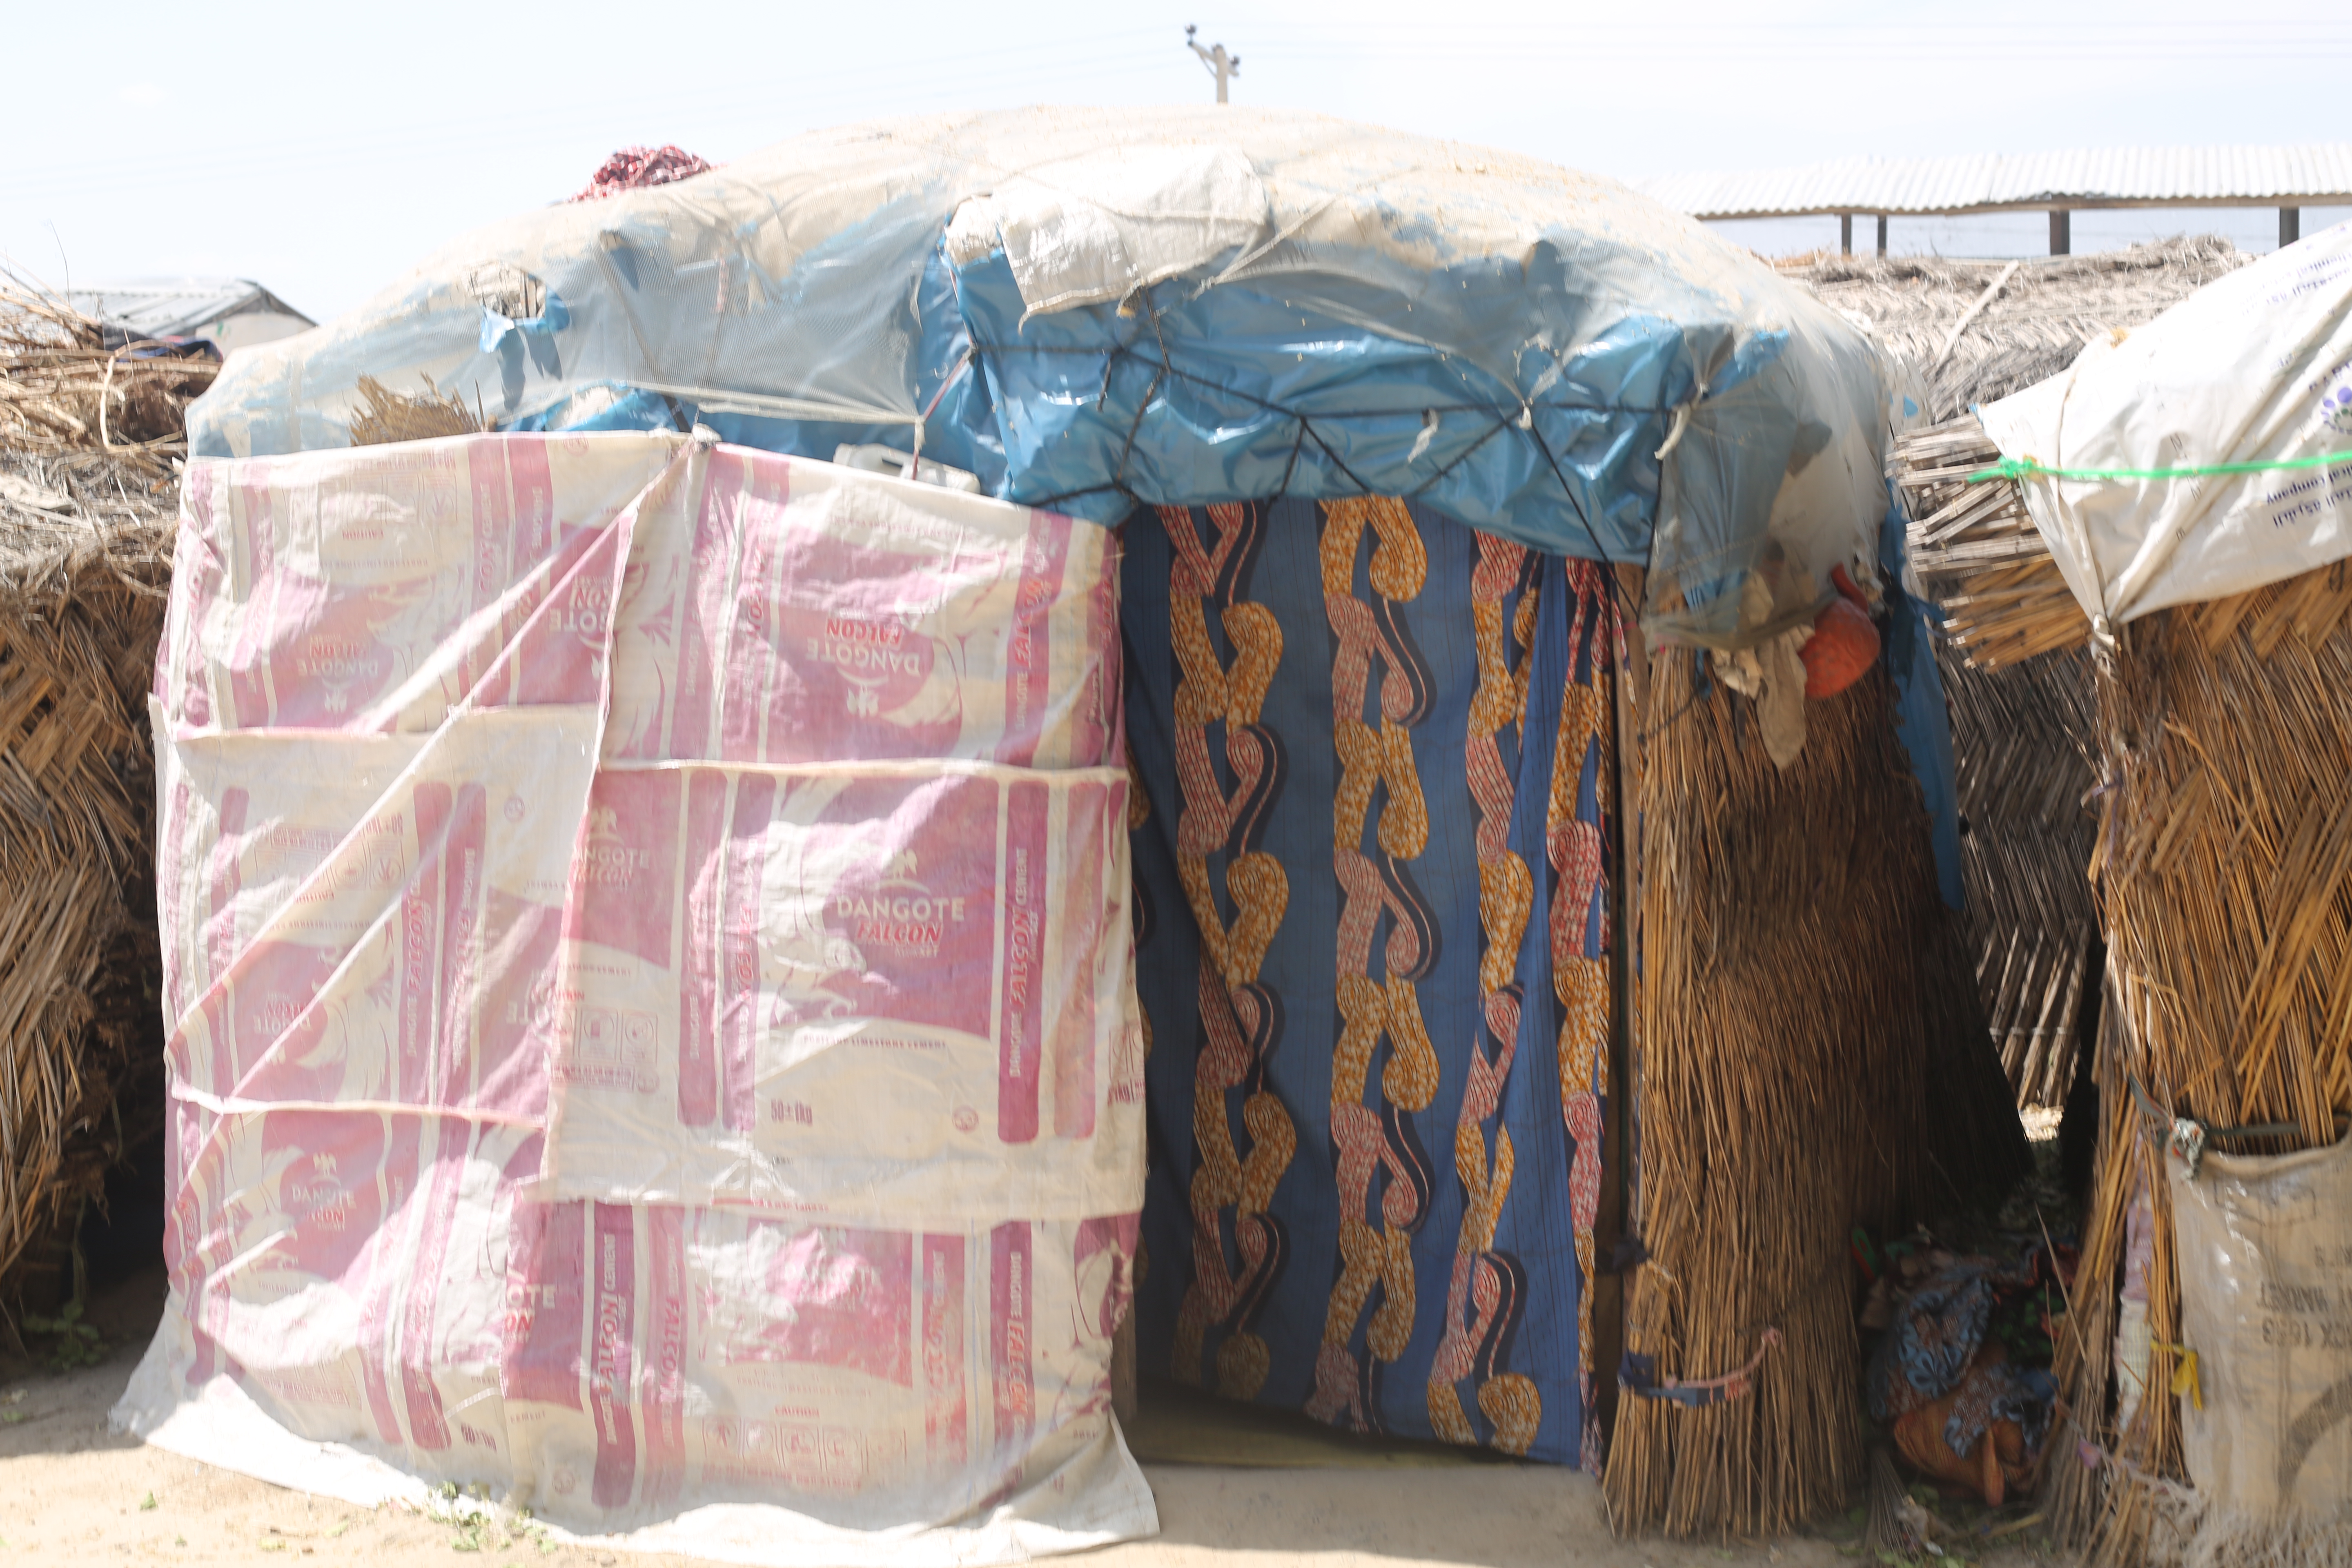 'RE-DISPLACED' IDPs: The Woman Whose Husband Joined Boko Haram and Other Stories